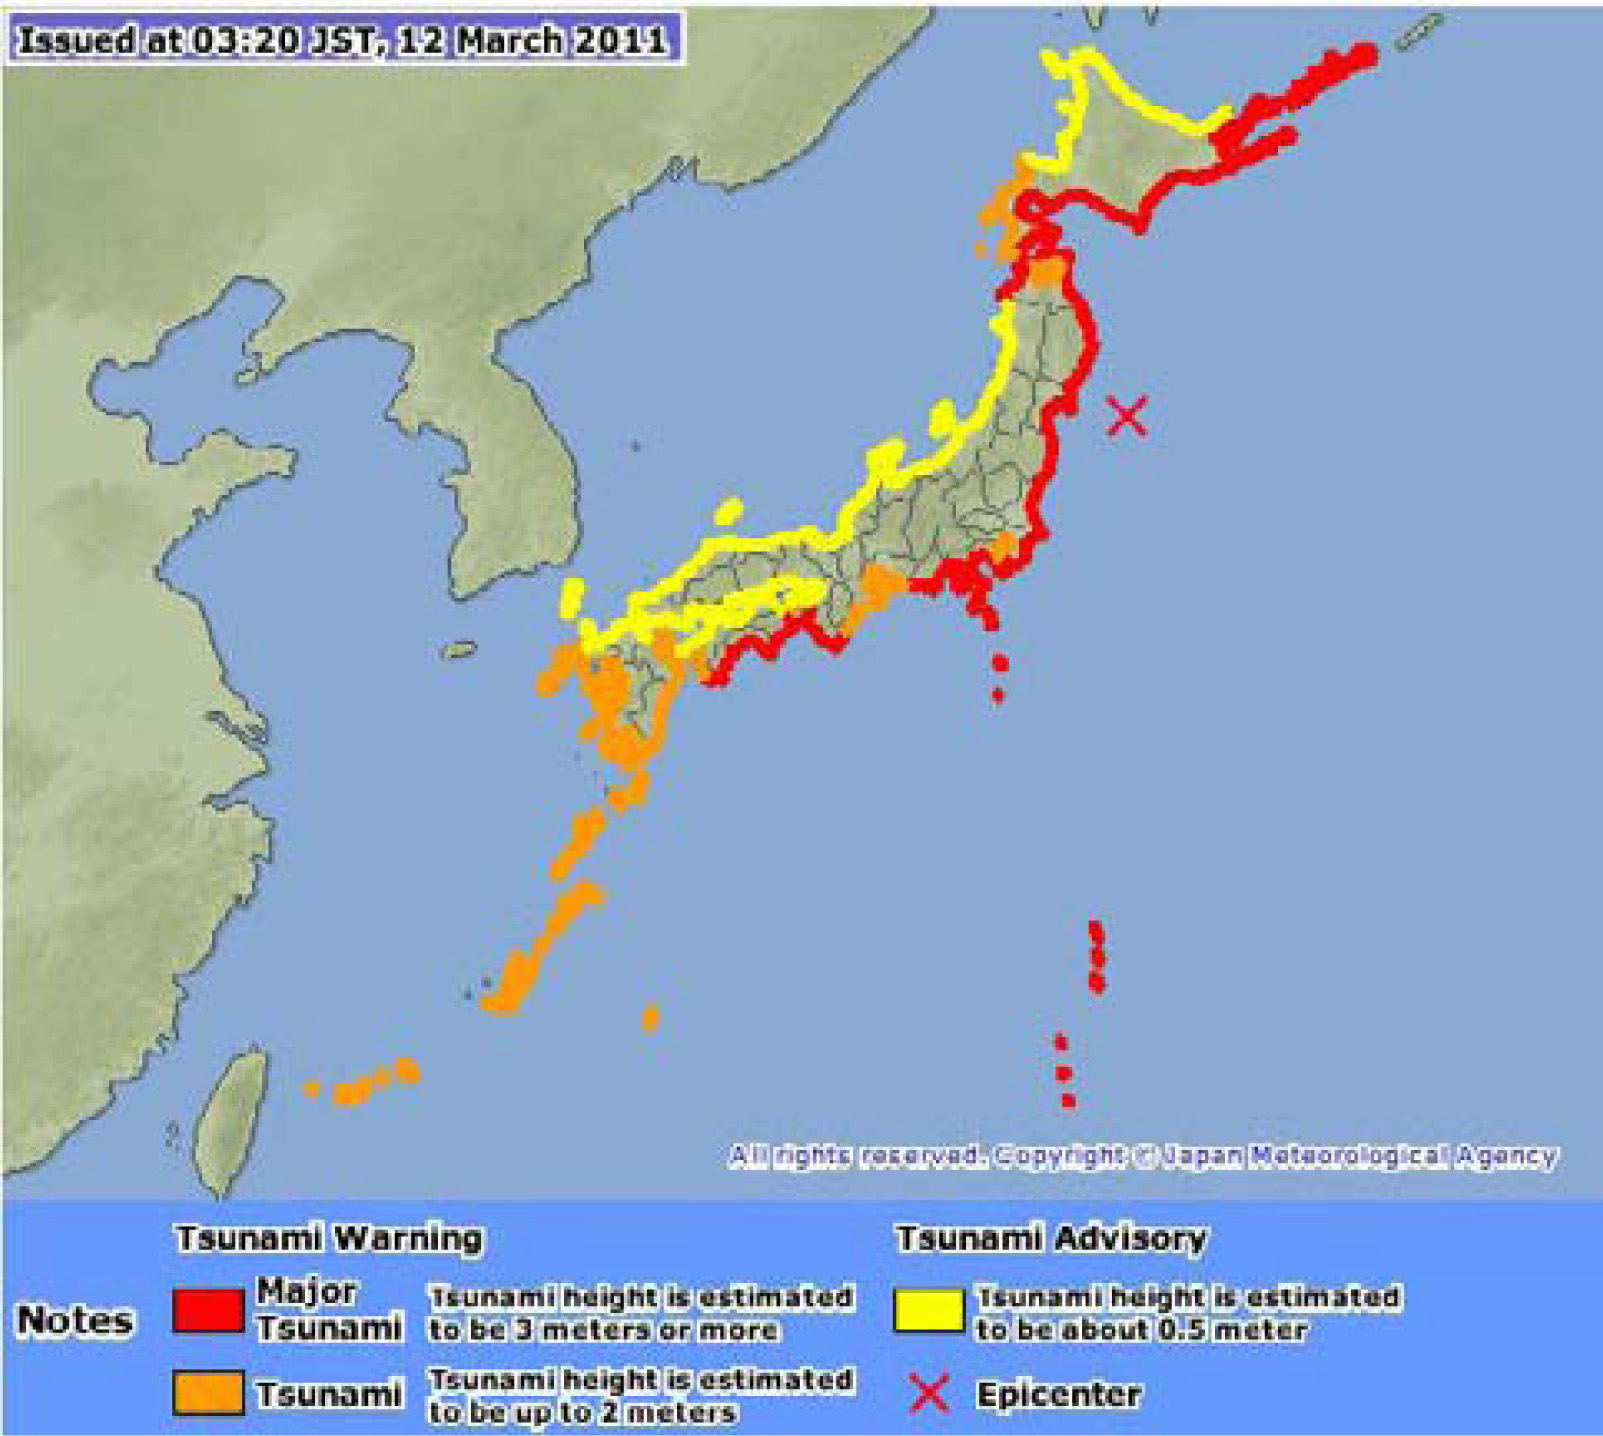 Outline of the 2011 off the Pacific coast of Tohoku